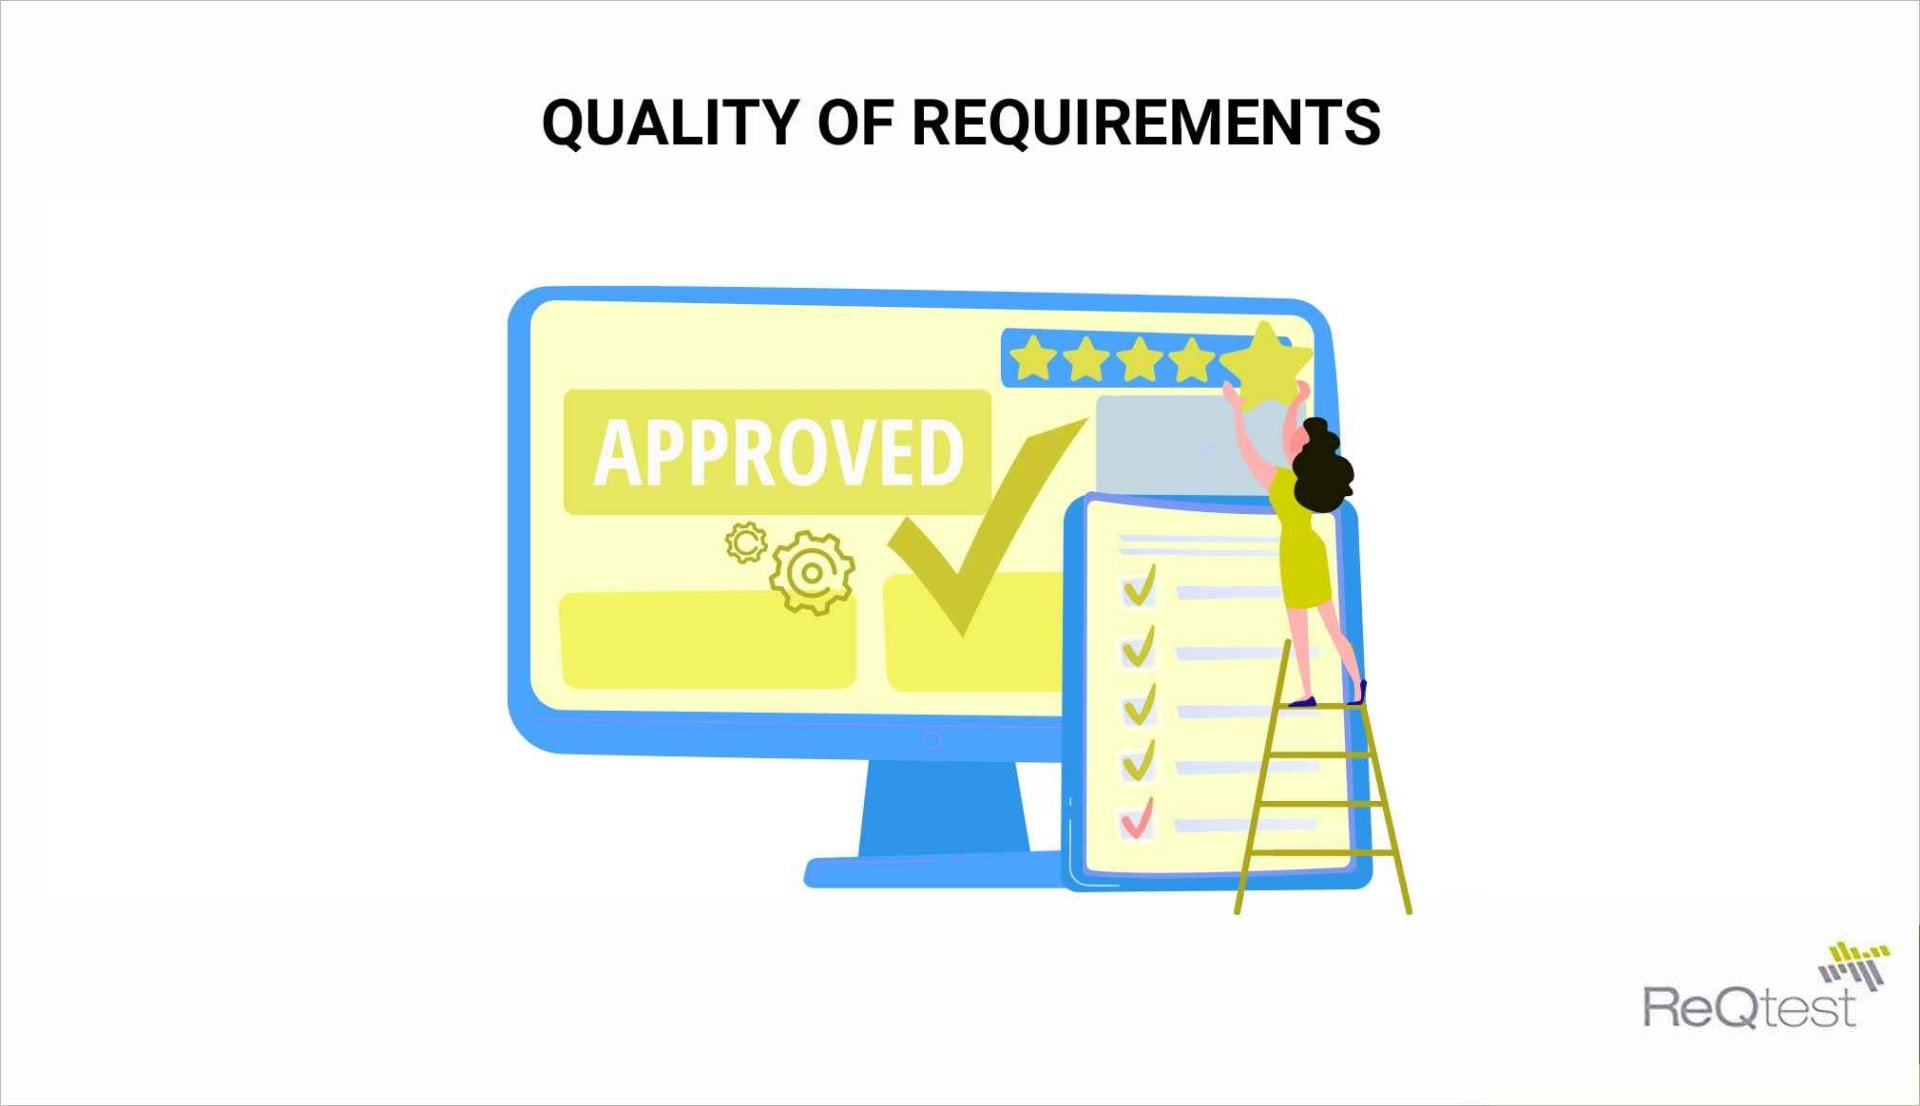 Quality of requirements